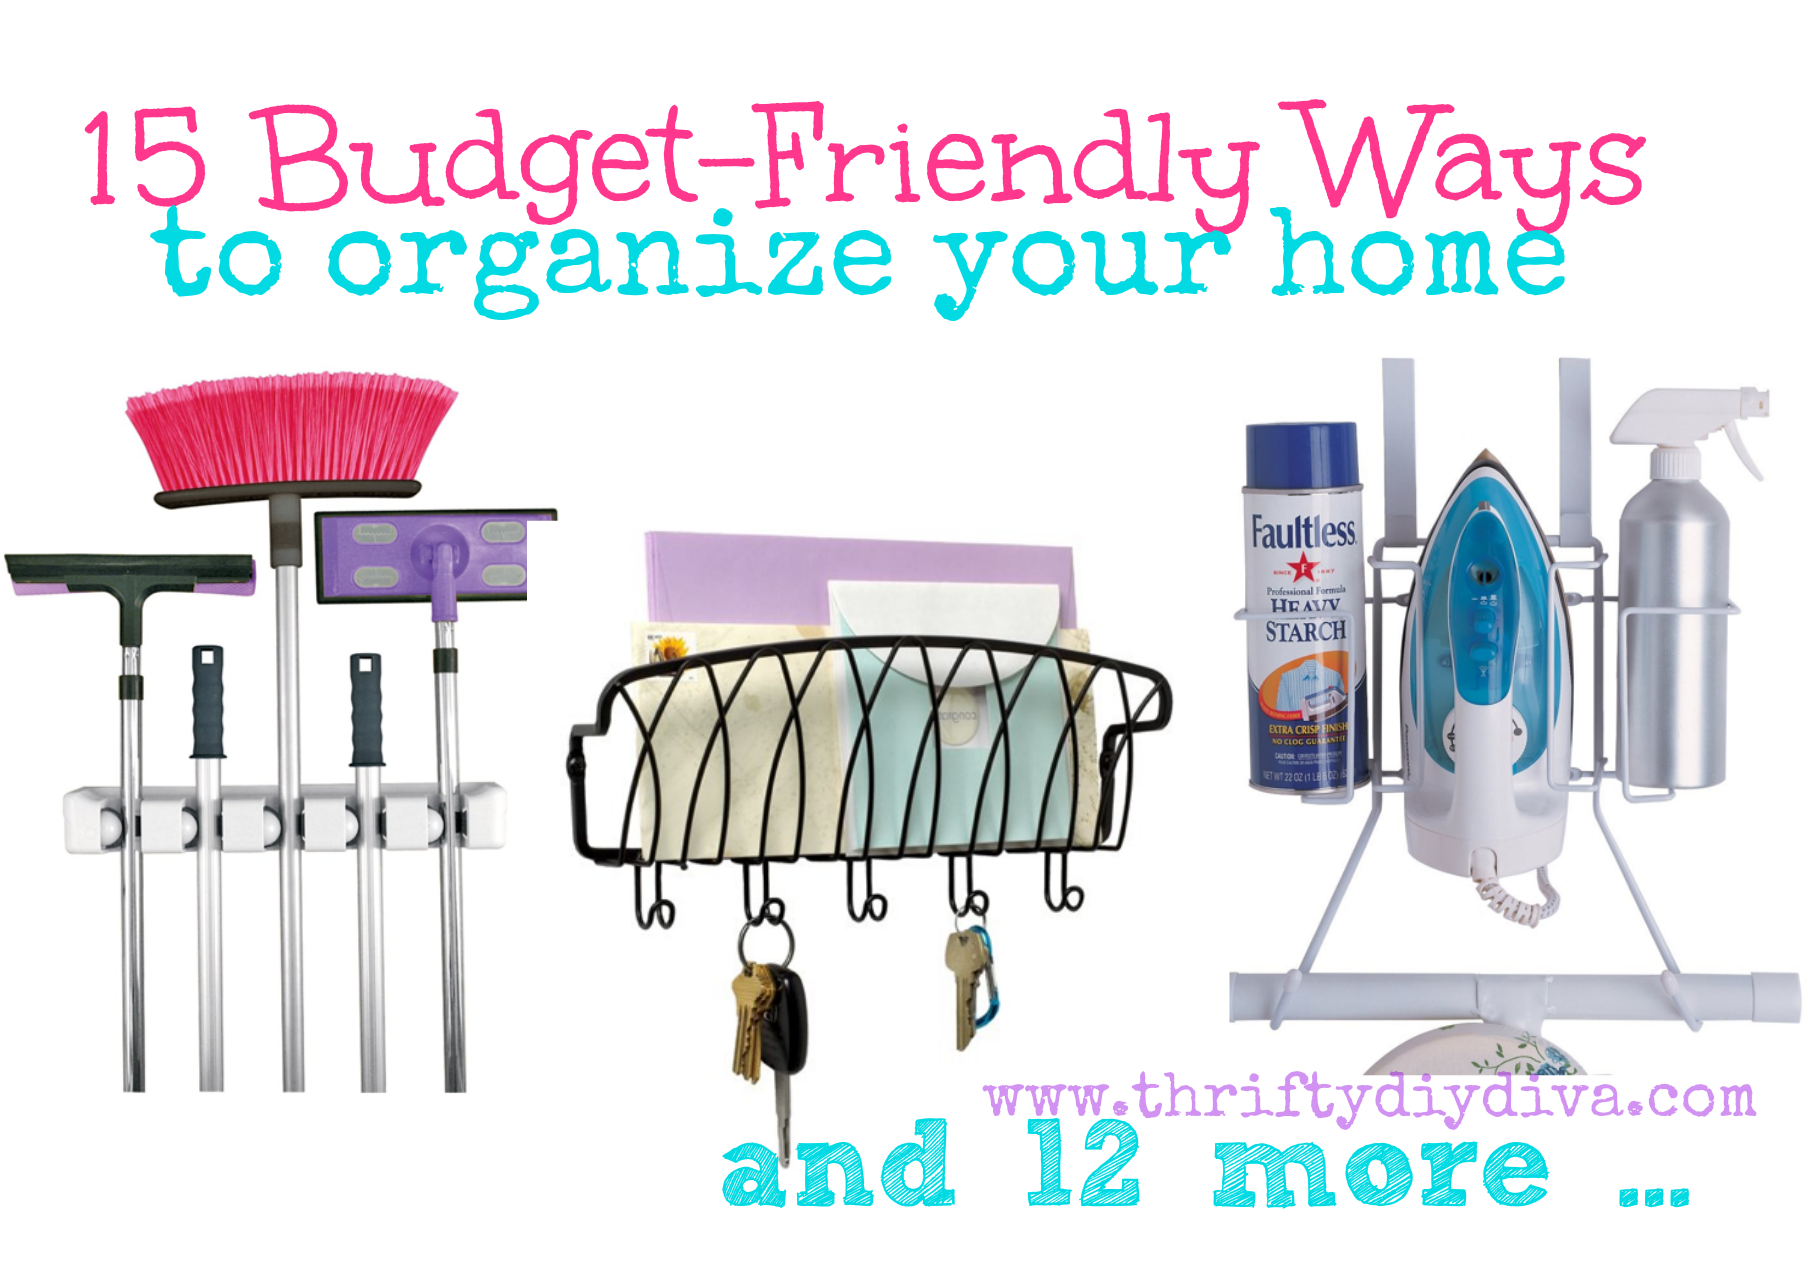 15 Budget-Friendly Ways to Organize Your Home